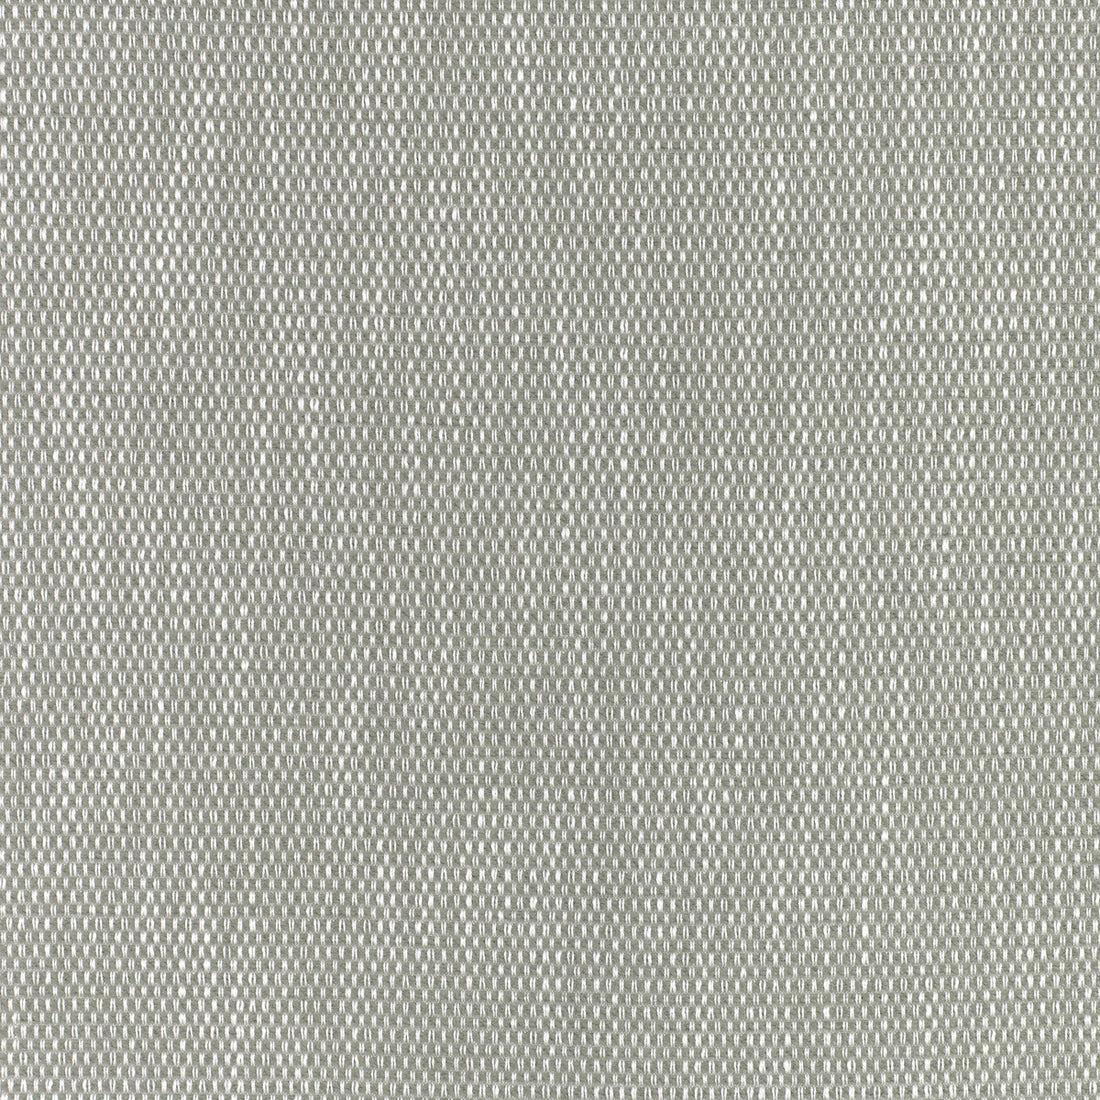 Narrows fabric in smoke color - pattern 37049.11.0 - by Kravet Design in the Thom Filicia Latitude collection